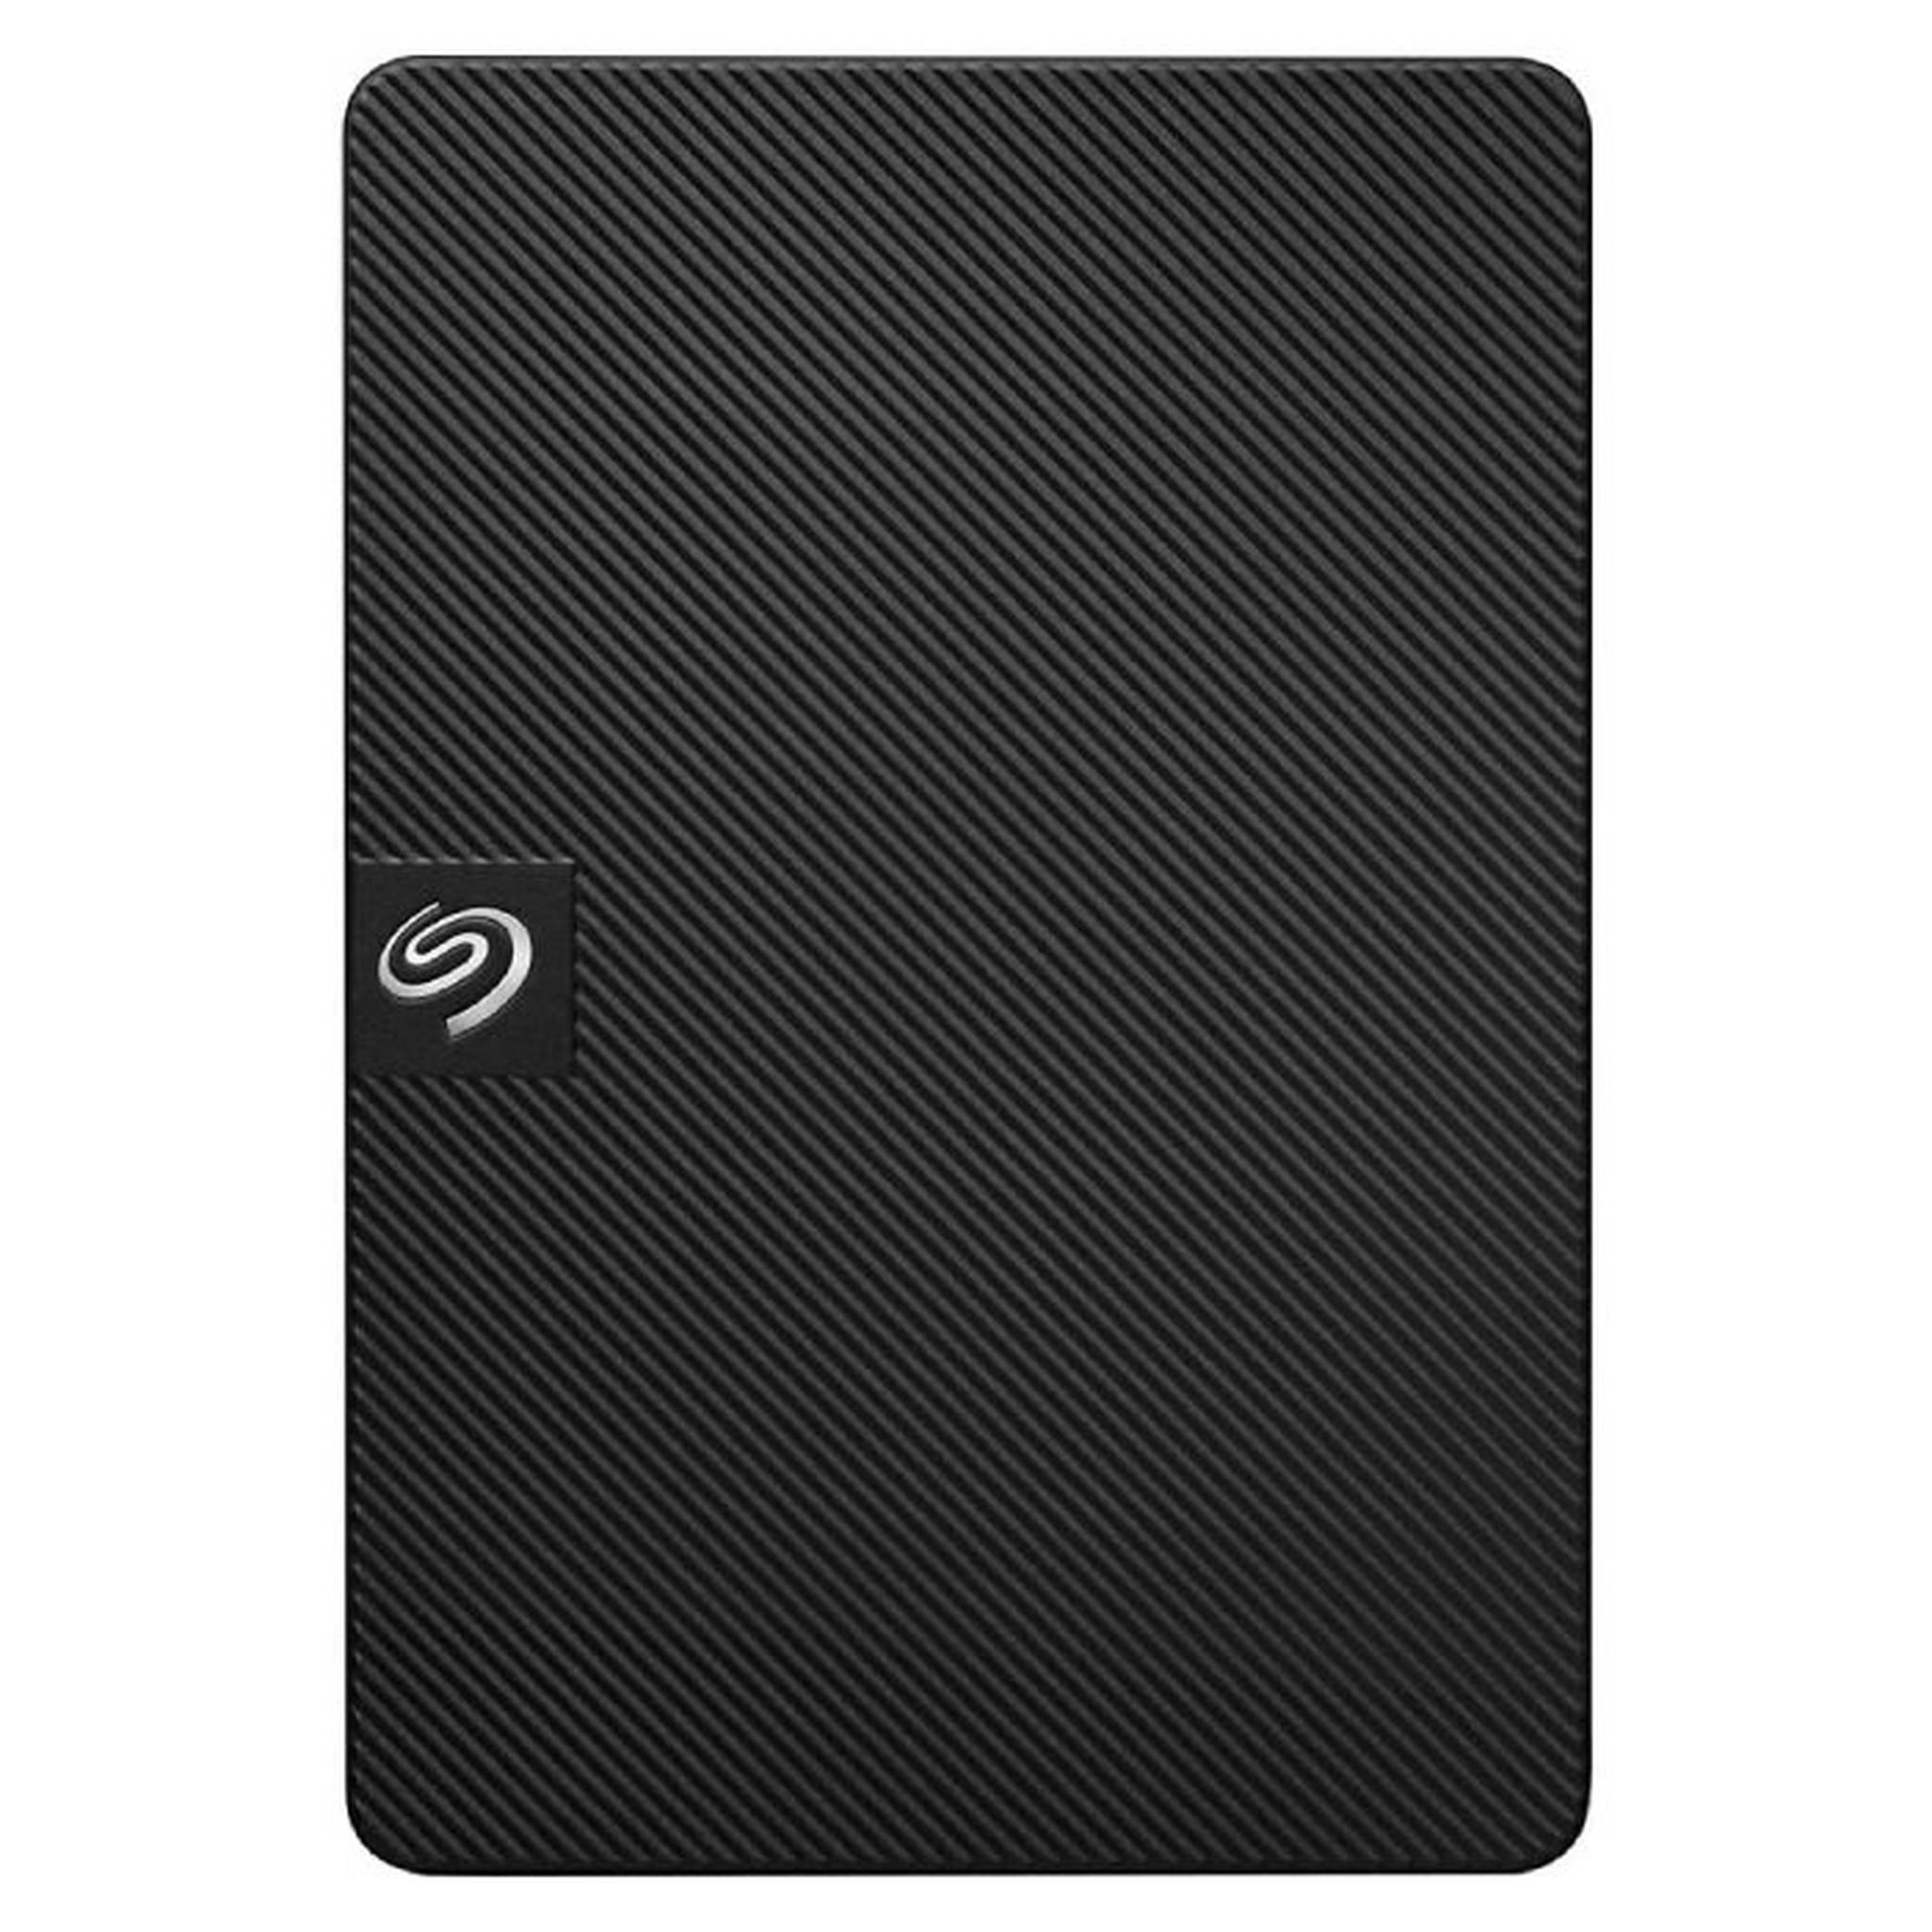 Seagate Expansion Portable External Hard Drive, 5TB, USB 3.0, for Mac and PC with Rescue Data Recovery Services - STKM5000400